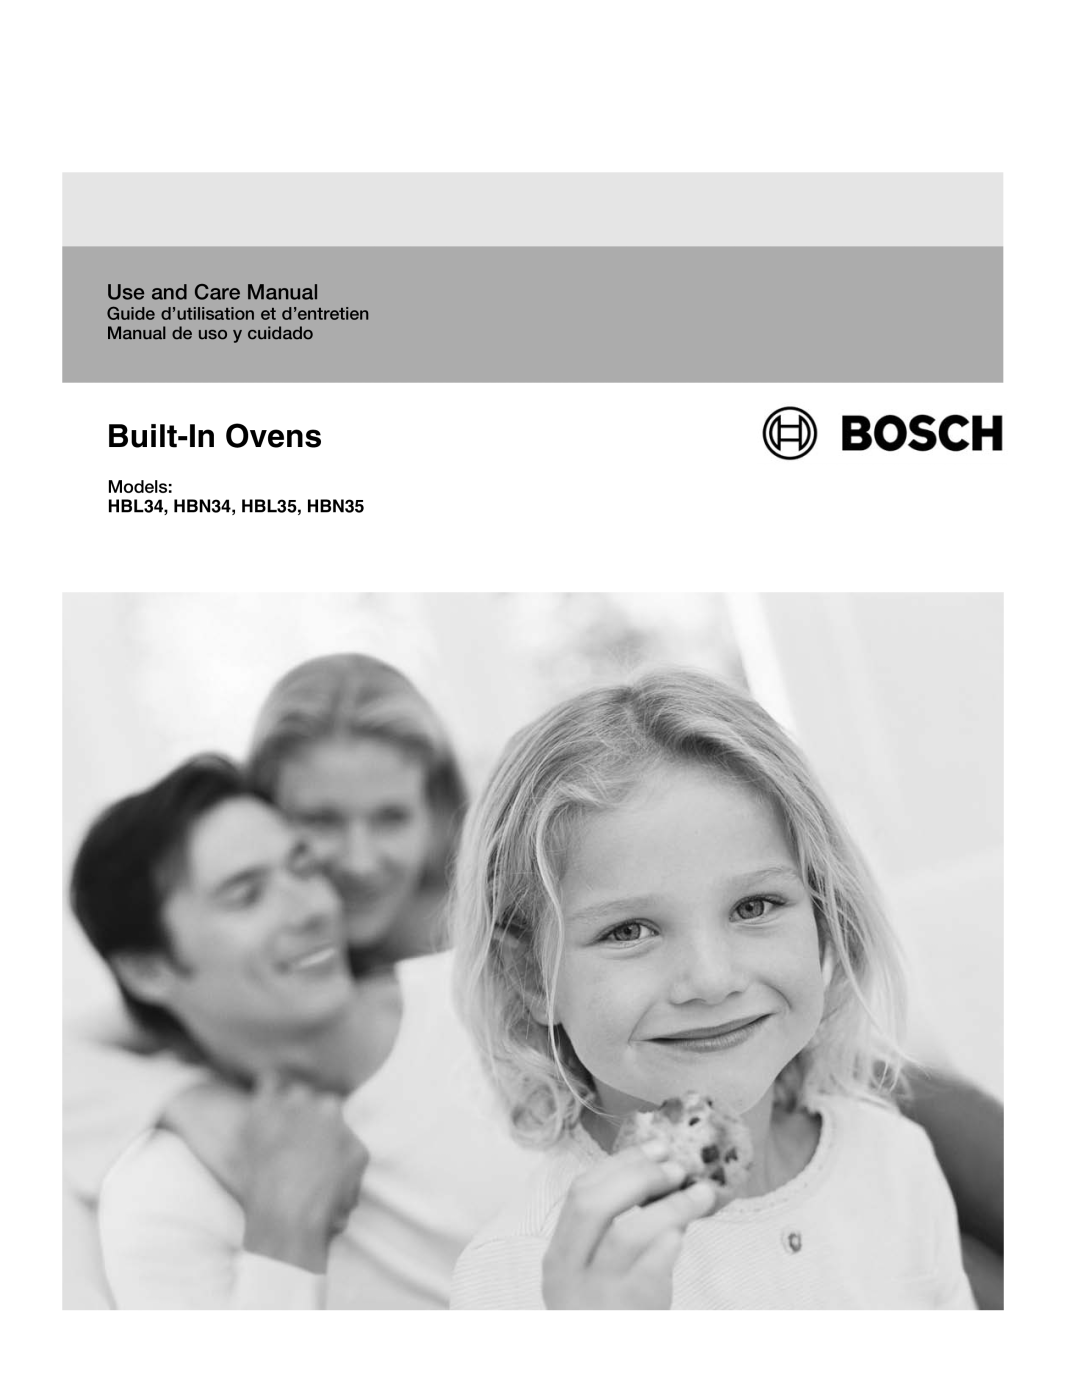 Bosch Appliances HBL35, HBN34, HBN35 manual Built-InOvens, Use and Care Manual 